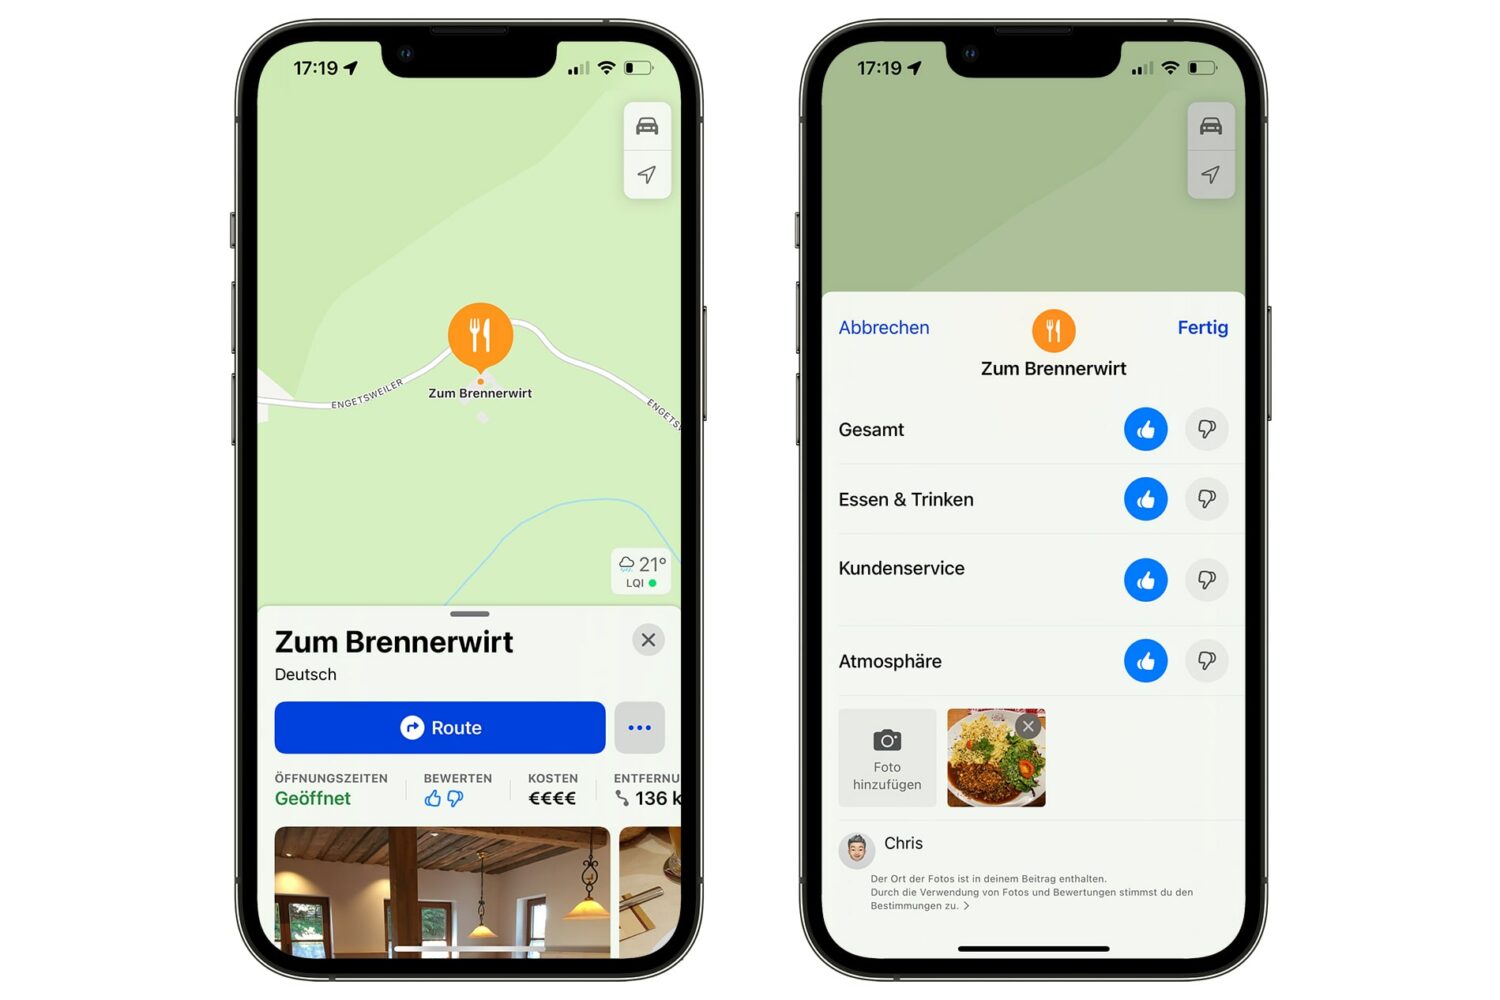 Two iPhone device screenshots showcasing native Apple Maps ratings for a restaurant in Germany